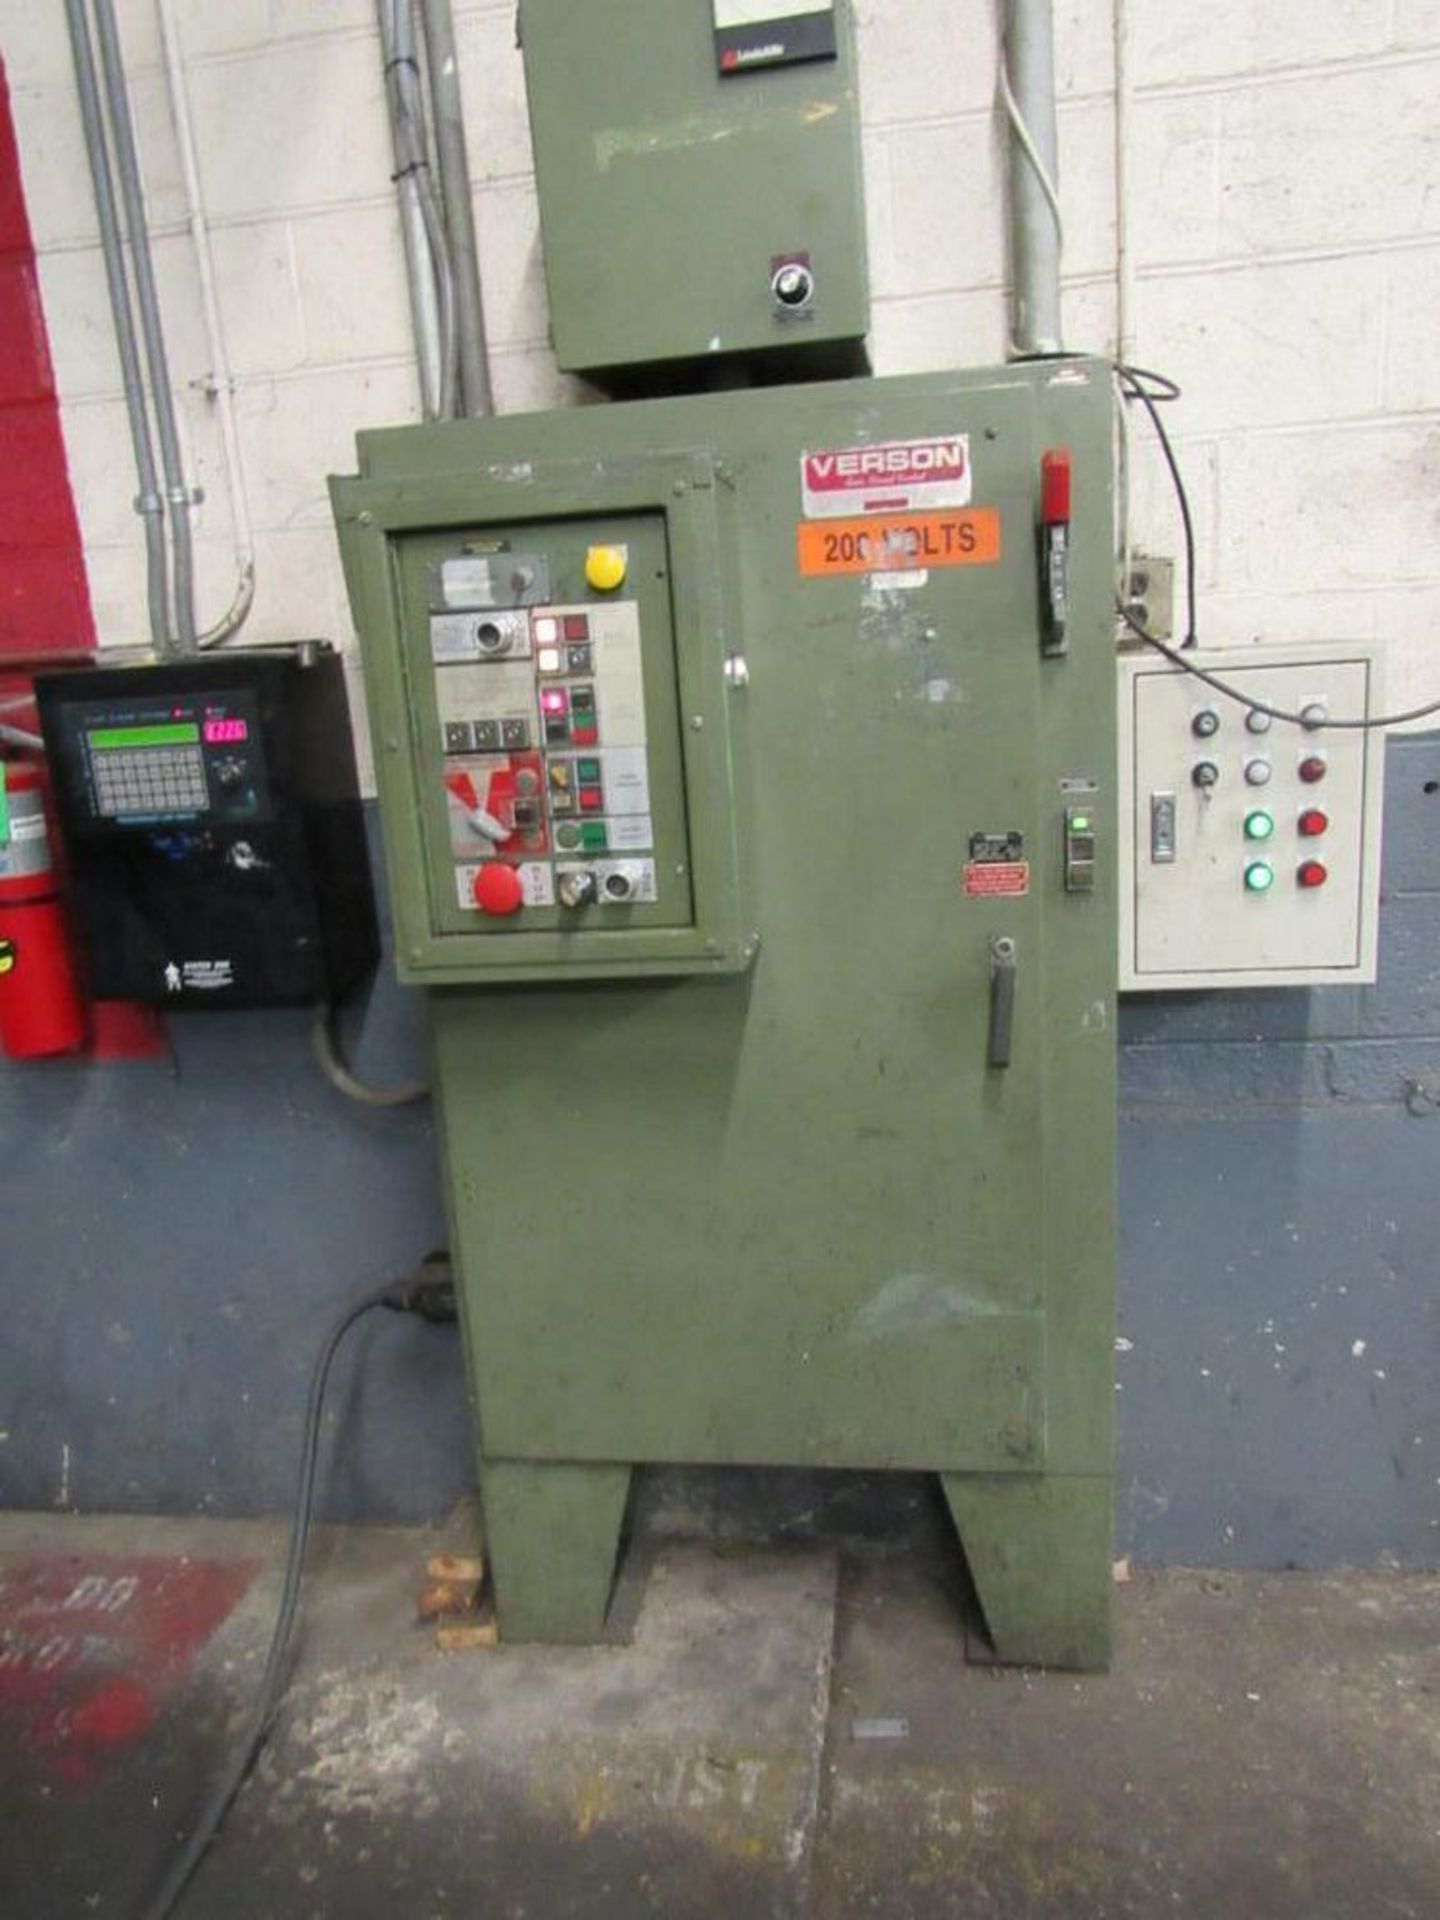 Verson 150 Ton 2-Point Straight Side Press Model S2-150-60-48T, S/N 28000, 6 in. Stroke, 8 in. Adjus - Image 3 of 7